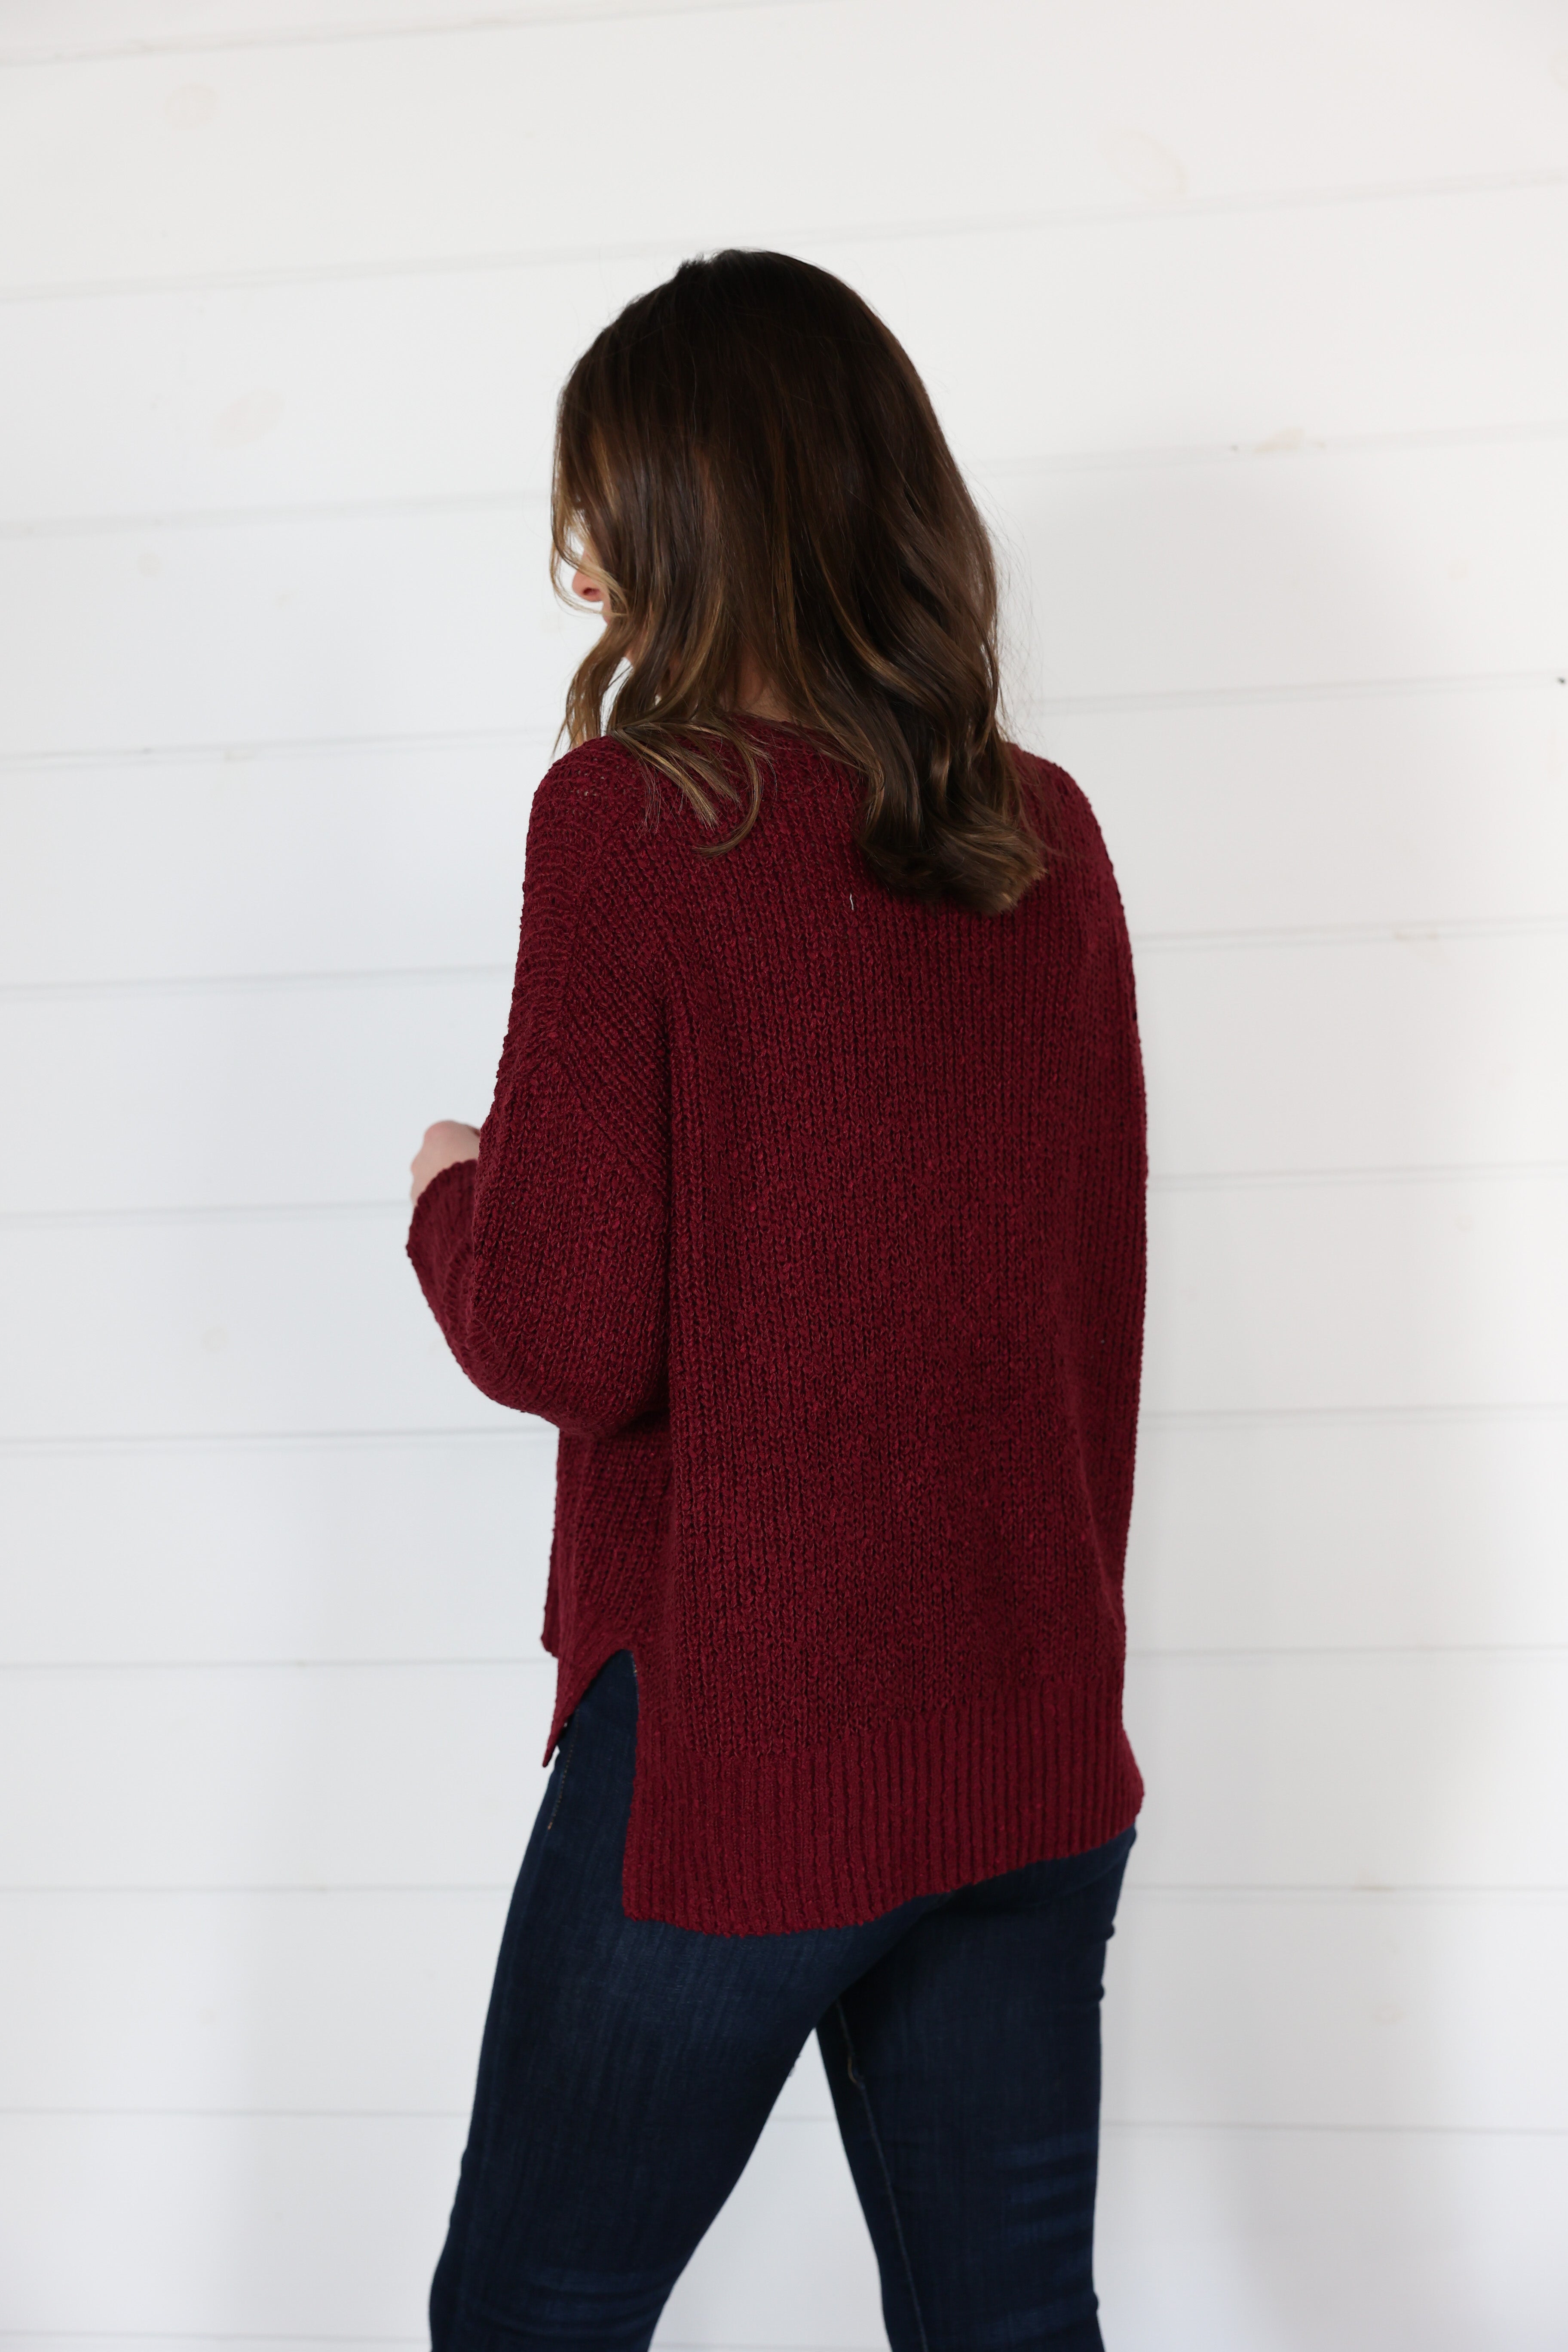 Sweet Red Wine Sweater (Two Left)